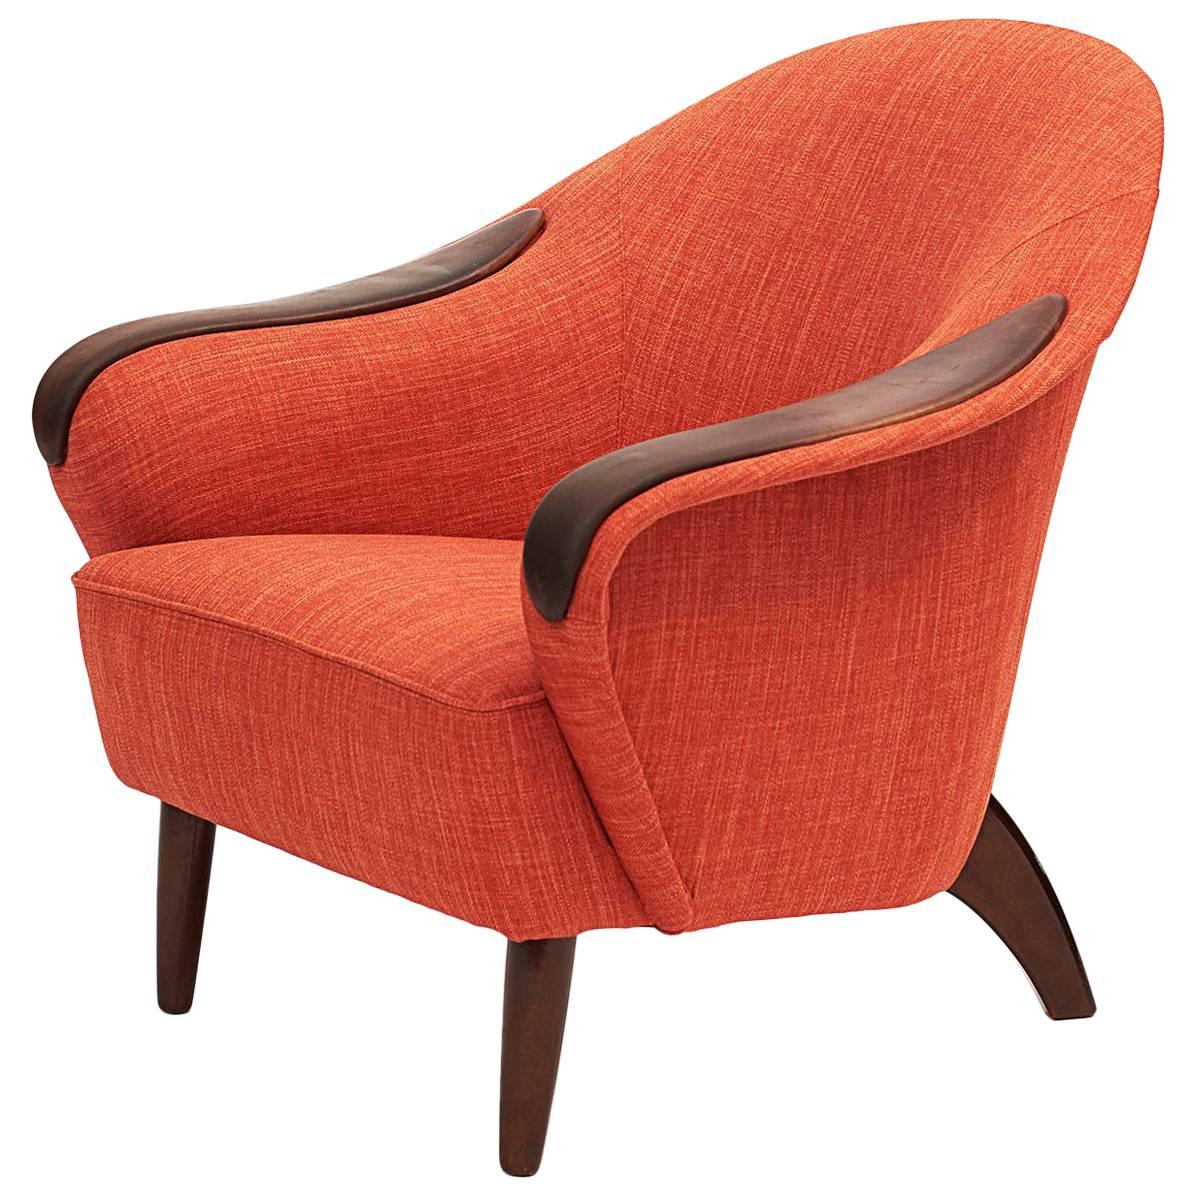 Stylish Danish Upholstered and Leather Club Chair, circa 1960